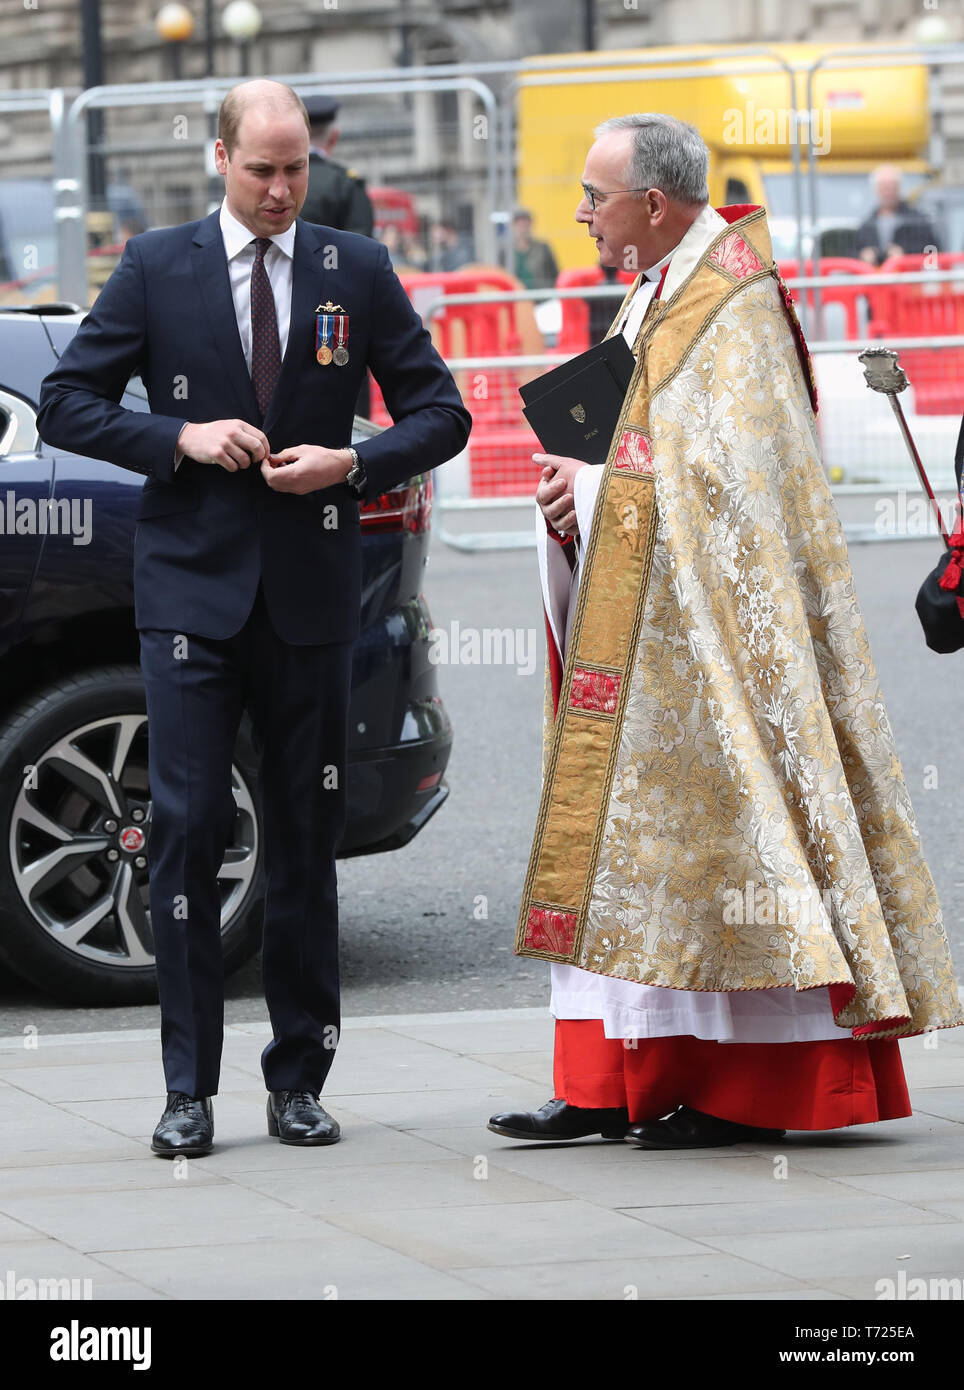 The Duke of Cambridge attends a service at Westminster Abbey to recognise fifty years of continuous deterrent at sea in his capacity as Commodore-in-Chief of the Submarine Service. Stock Photo